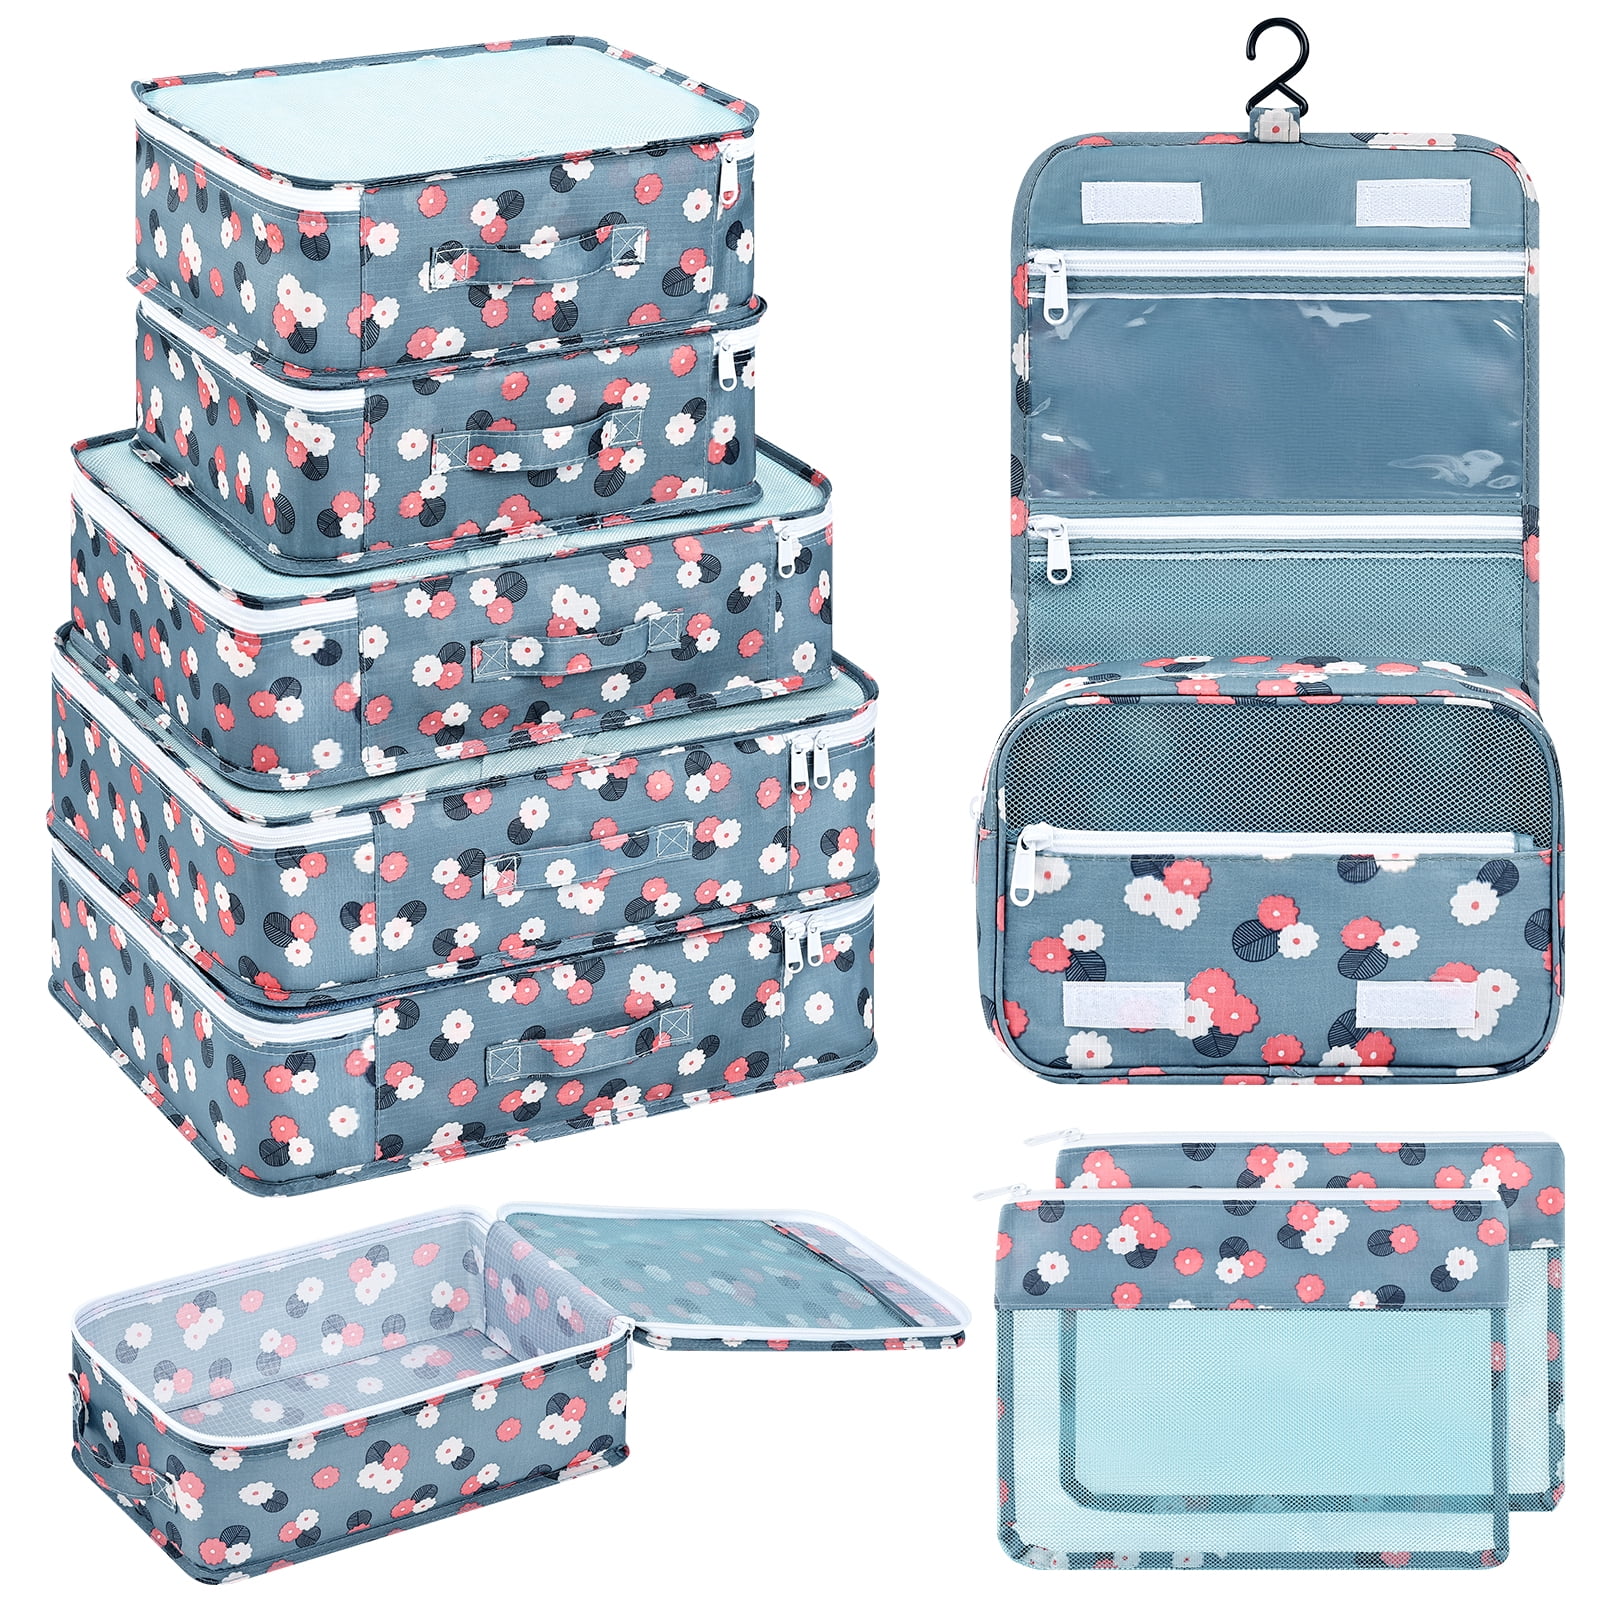 DIMJ Packing Cubes for Suitcase Organizer Bags Set Packing Cubes for Carry  on Suitcase Lightweight P…See more DIMJ Packing Cubes for Suitcase